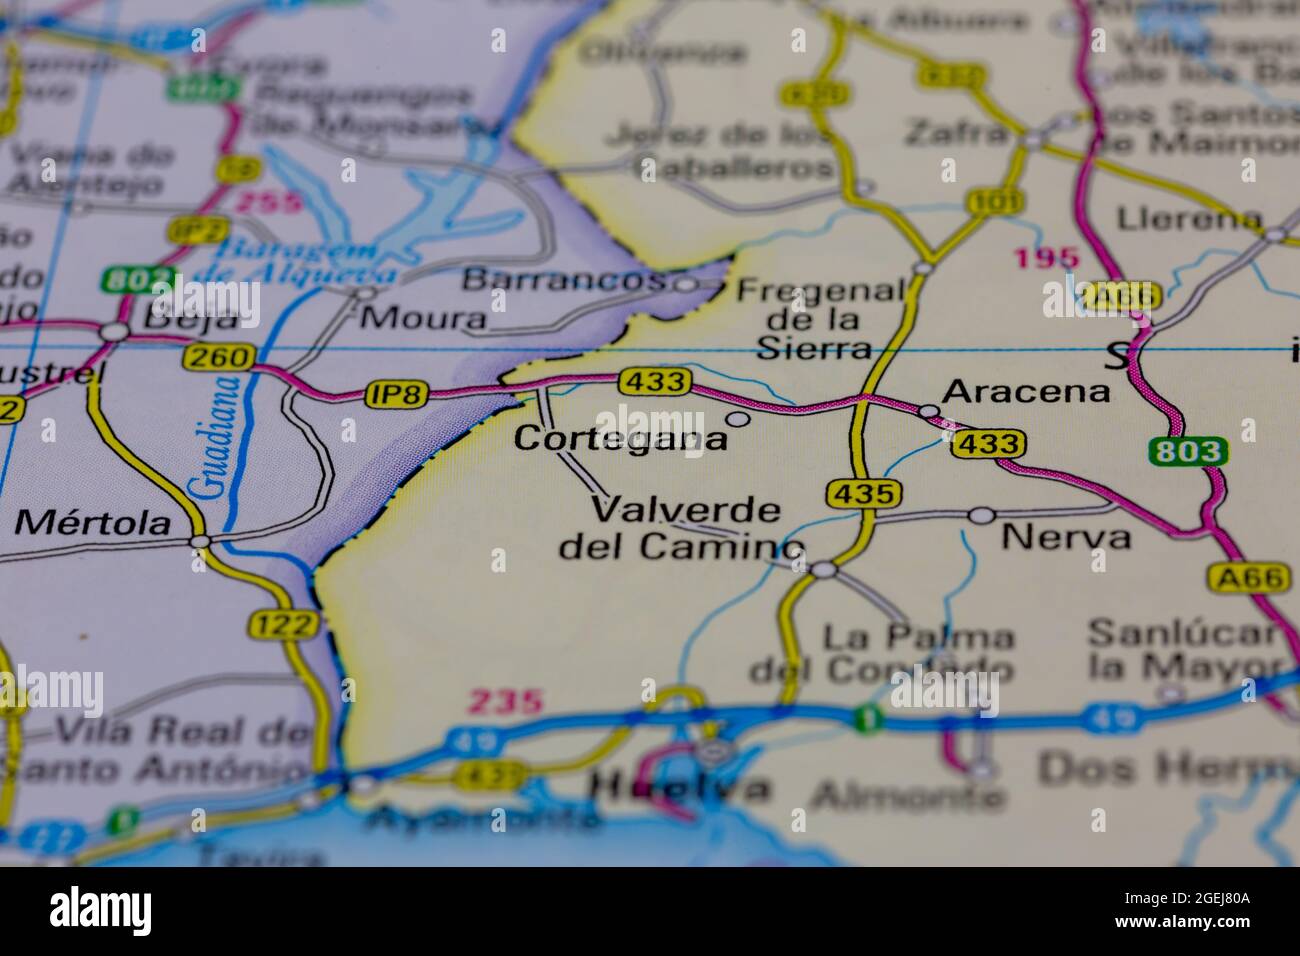 Cortegana Spain shown on a road map or Geography map Stock Photo